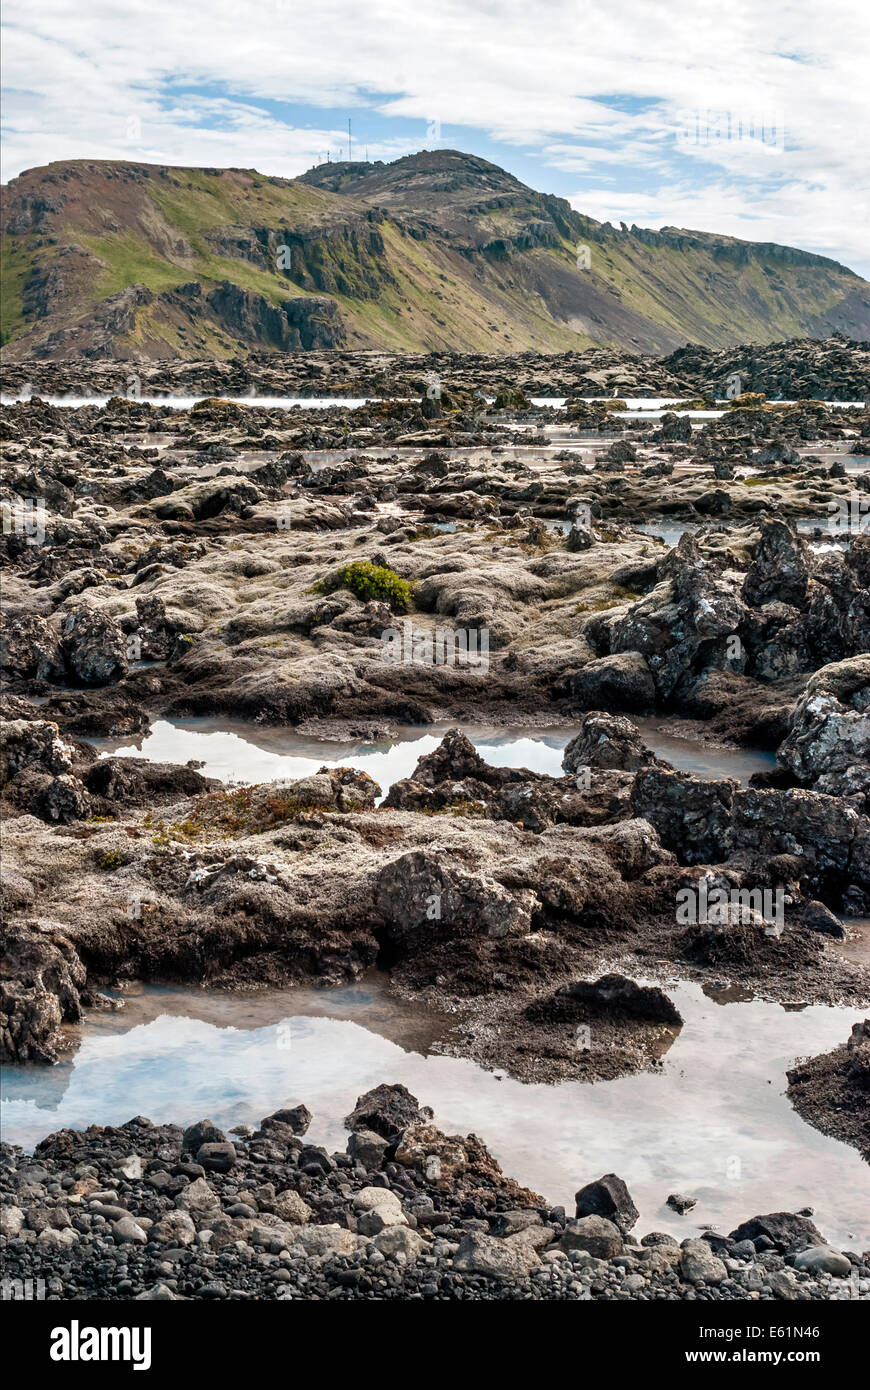 Volcano landscape at  the turquoise colored Blue Lagoon Hot Springs, Iceland. Stock Photo